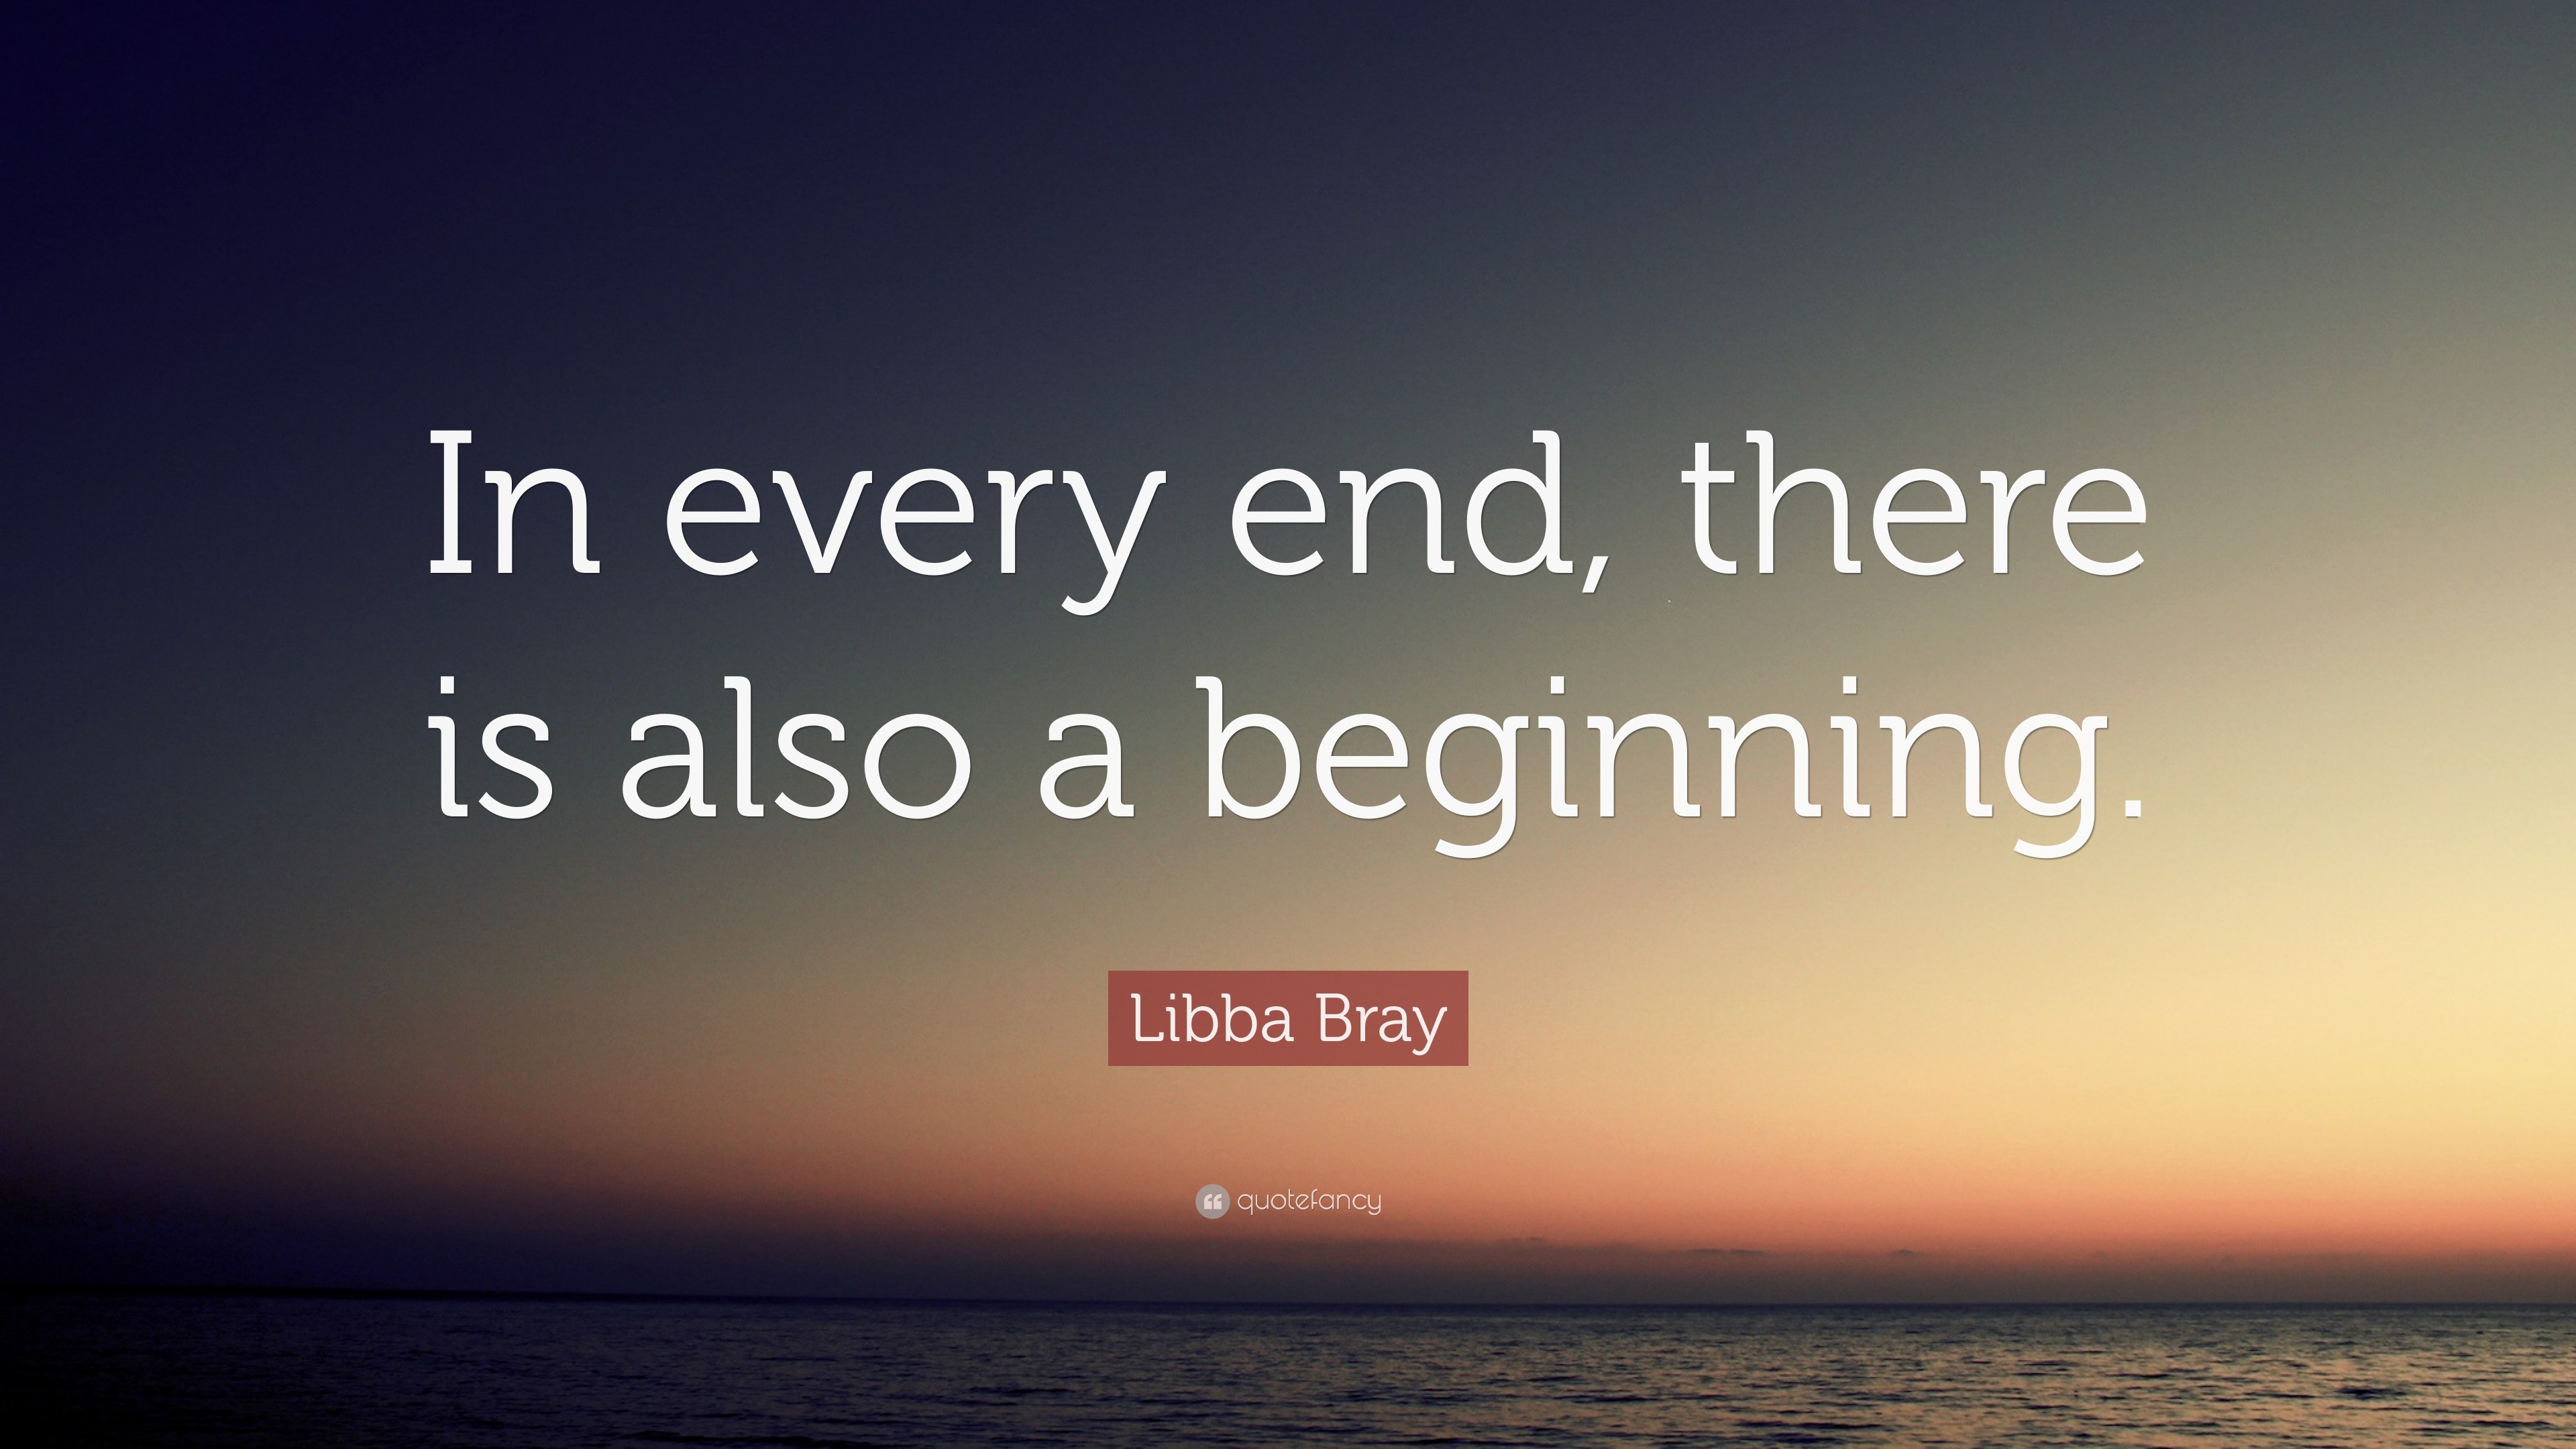 Libba Bray Quote: “In every end, there is also a beginning.”